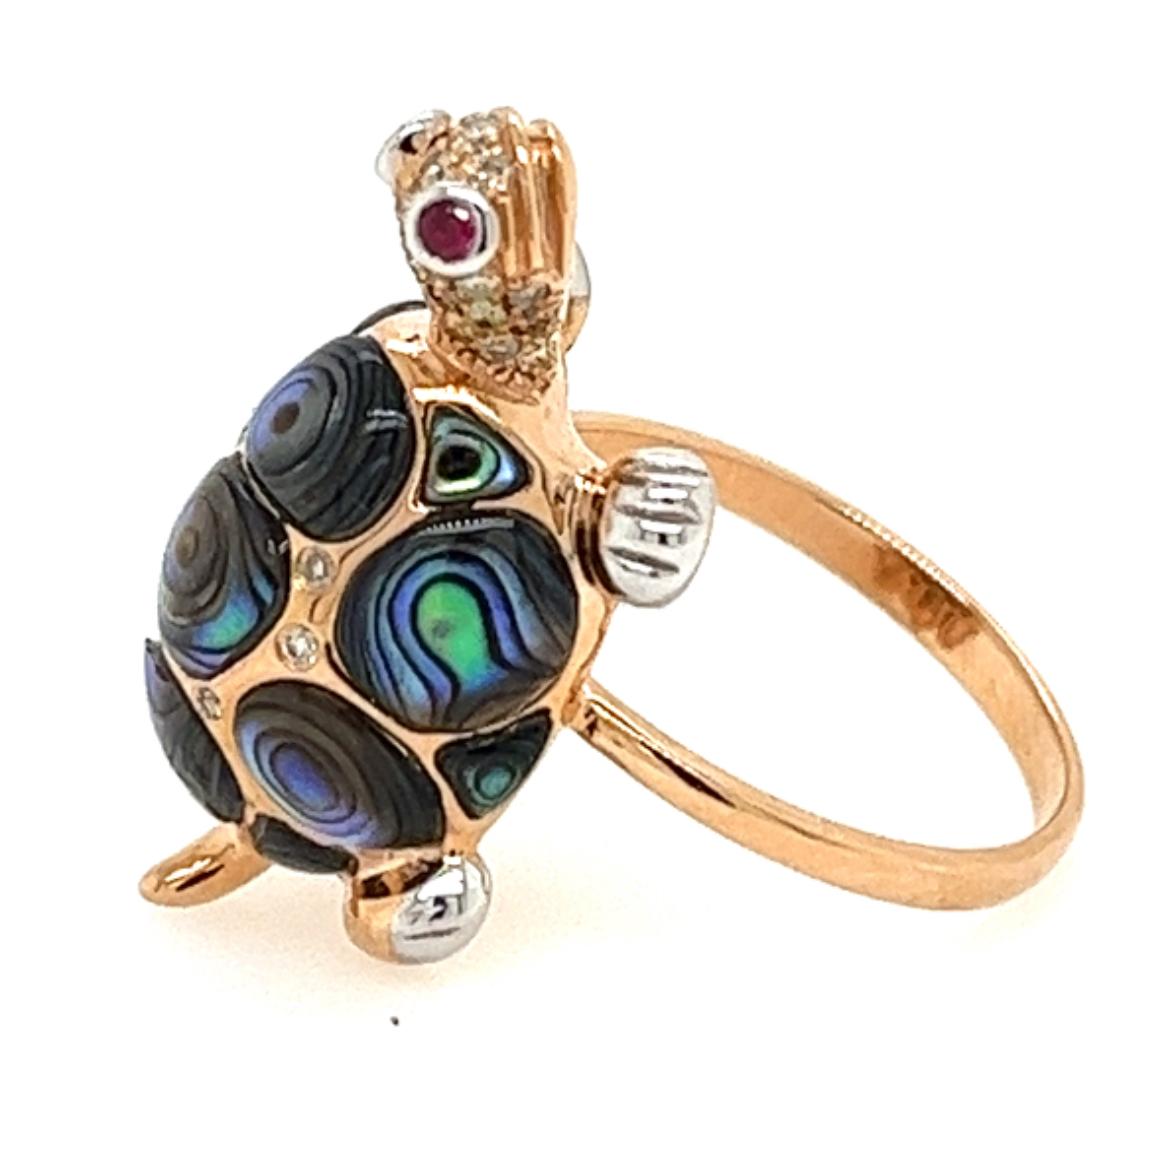 Modern 18K Gold Rose Gold Abalone Shell Turtle Ring with Diamonds